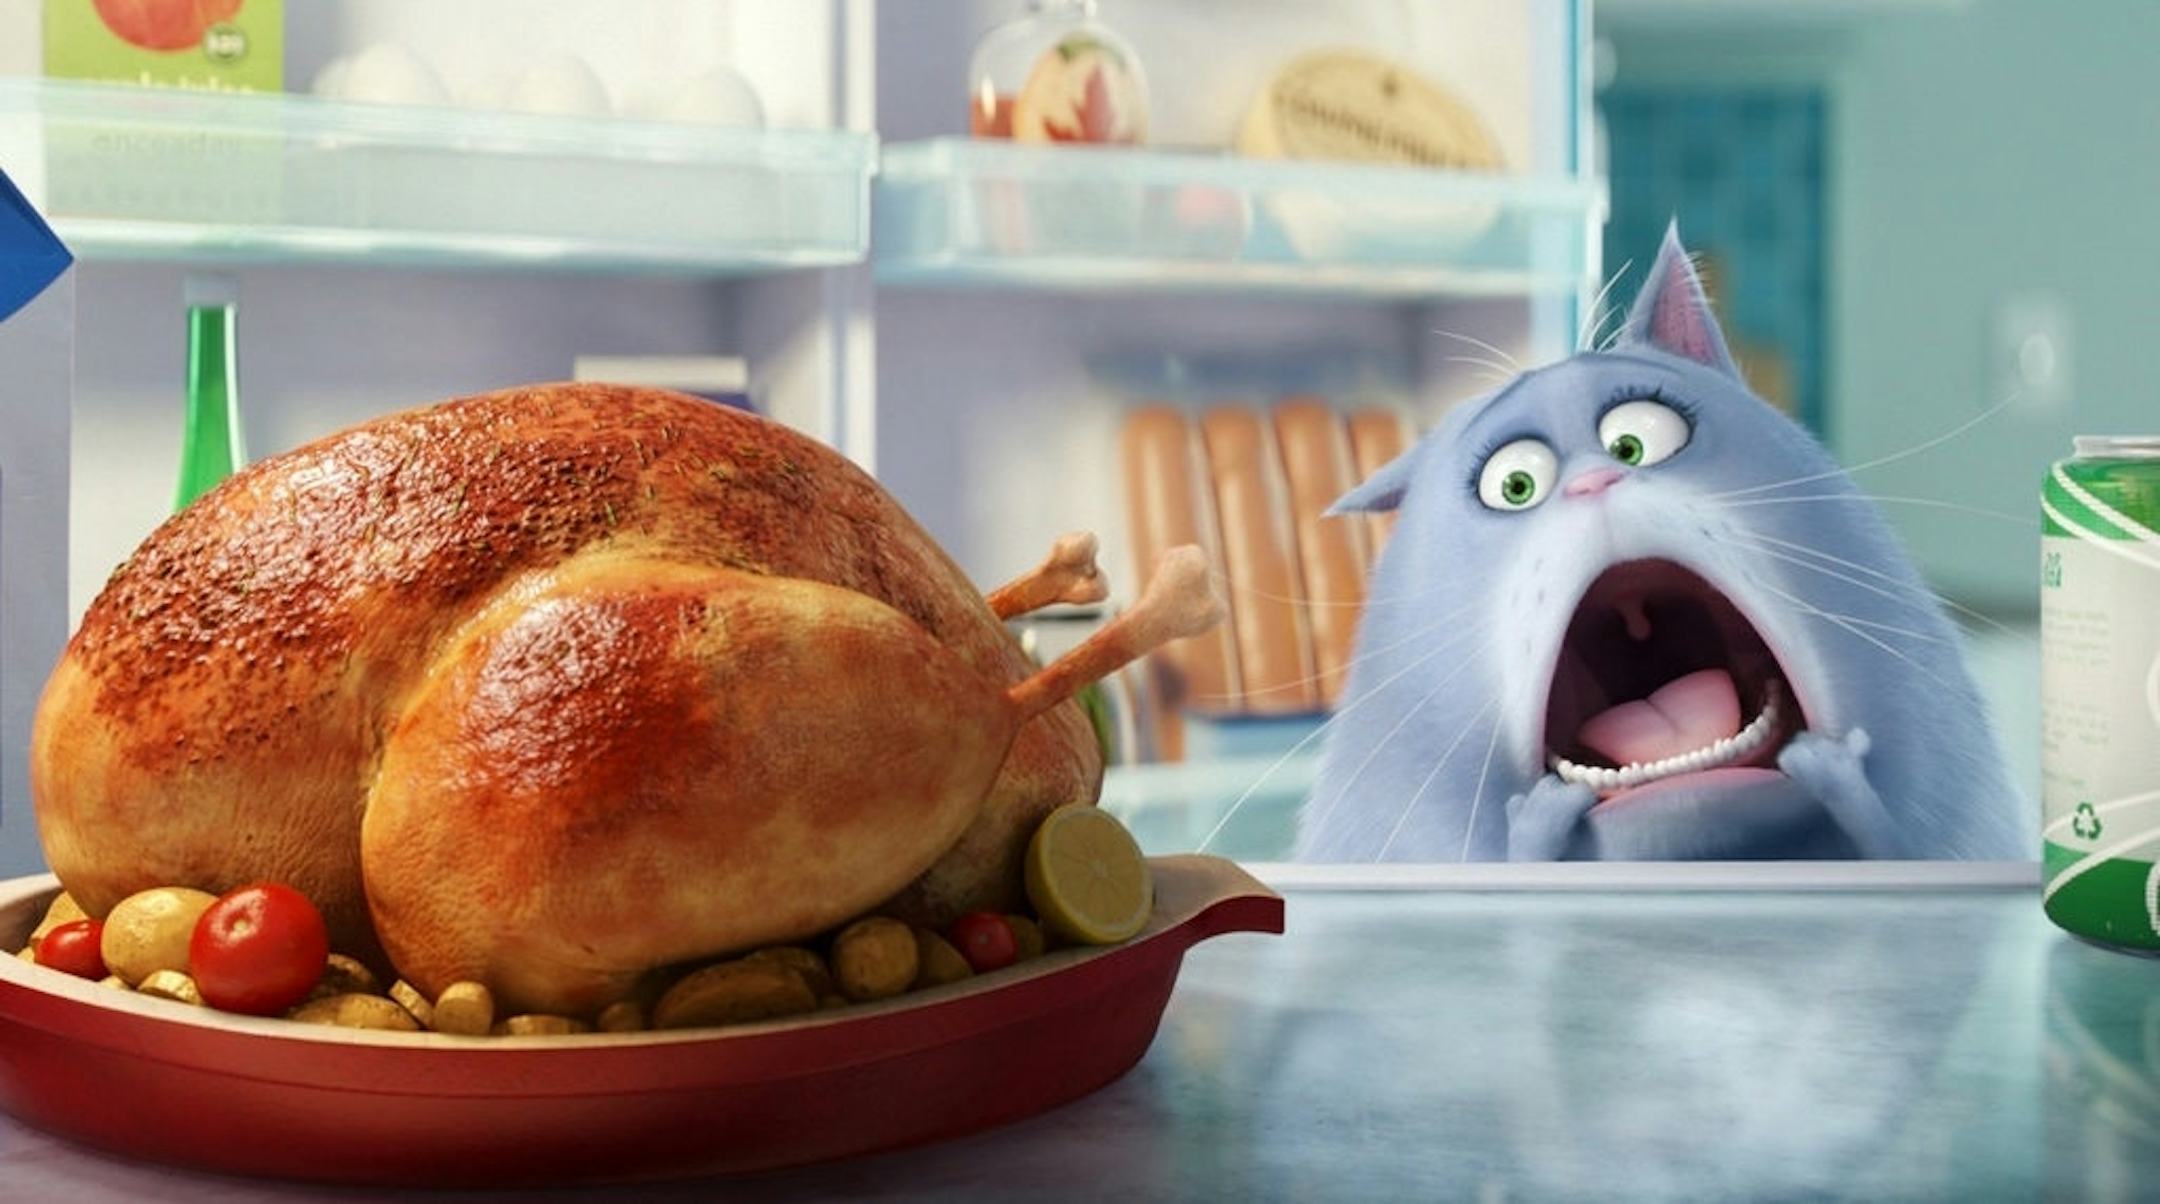 The 15 Funniest Animated Movie Performances of All Time